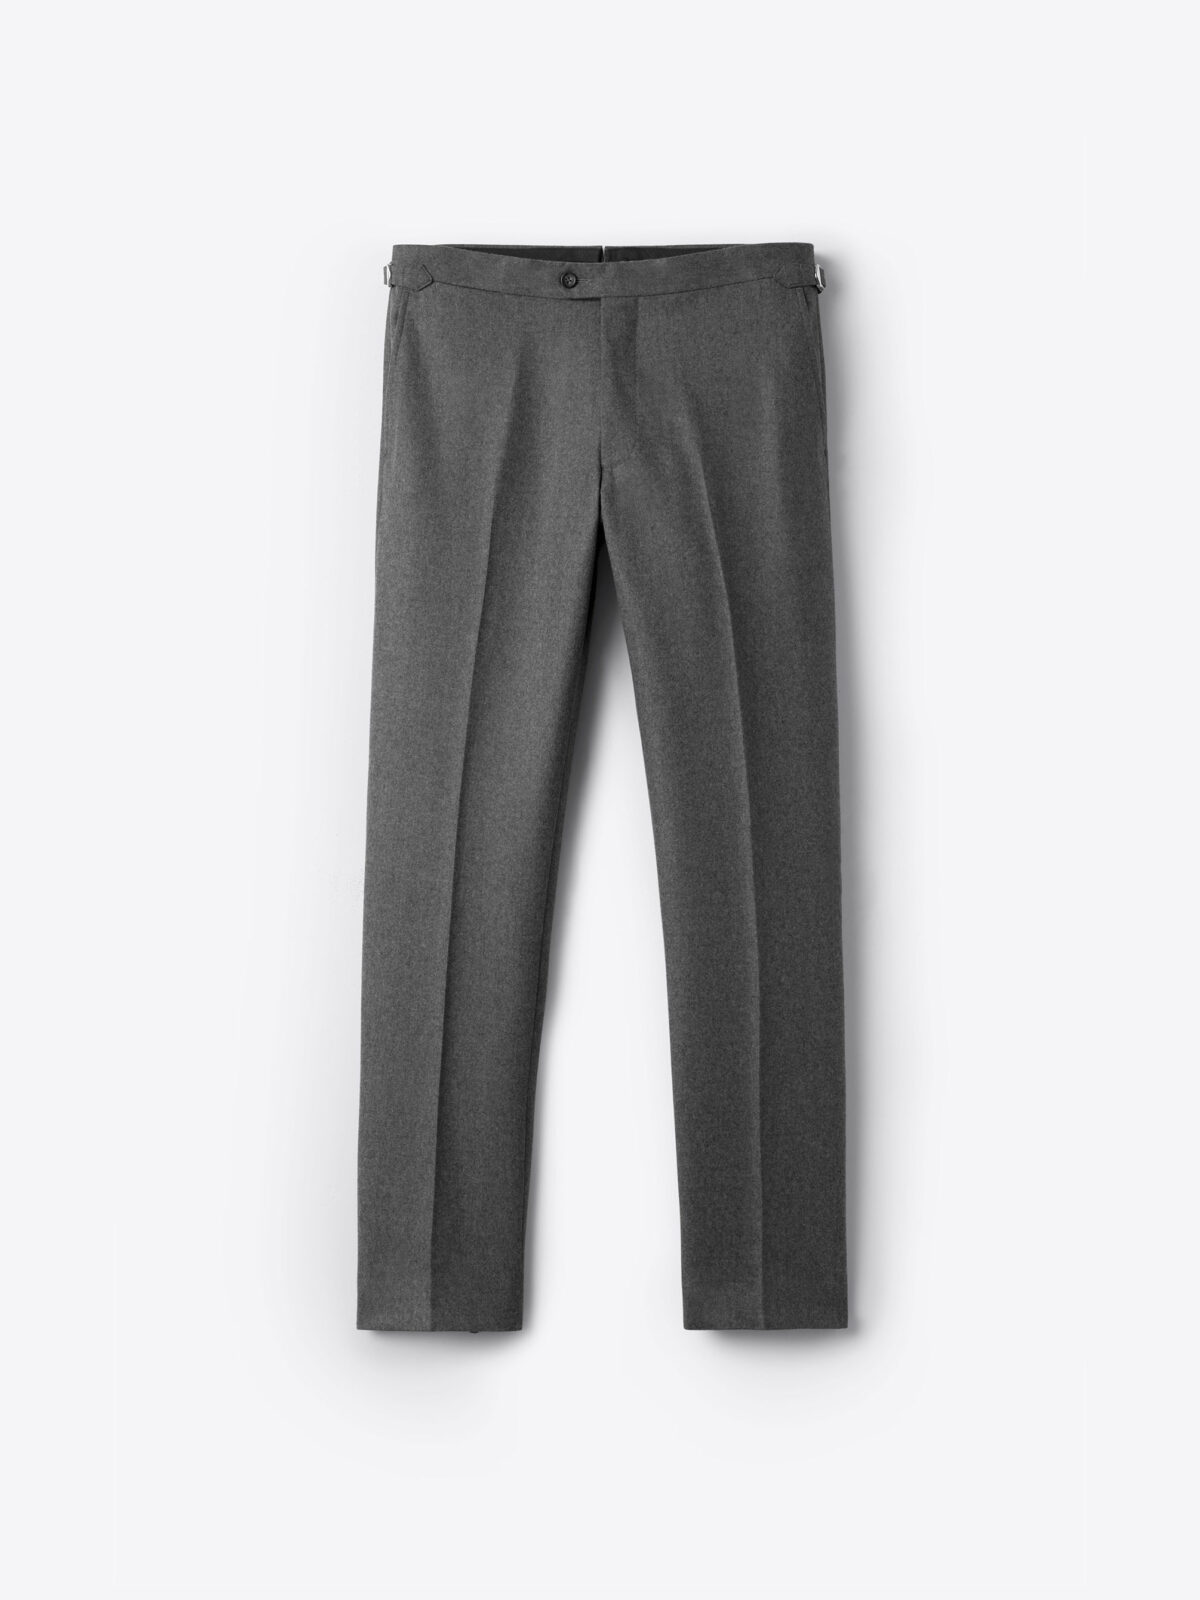 Worsted Wool Pants